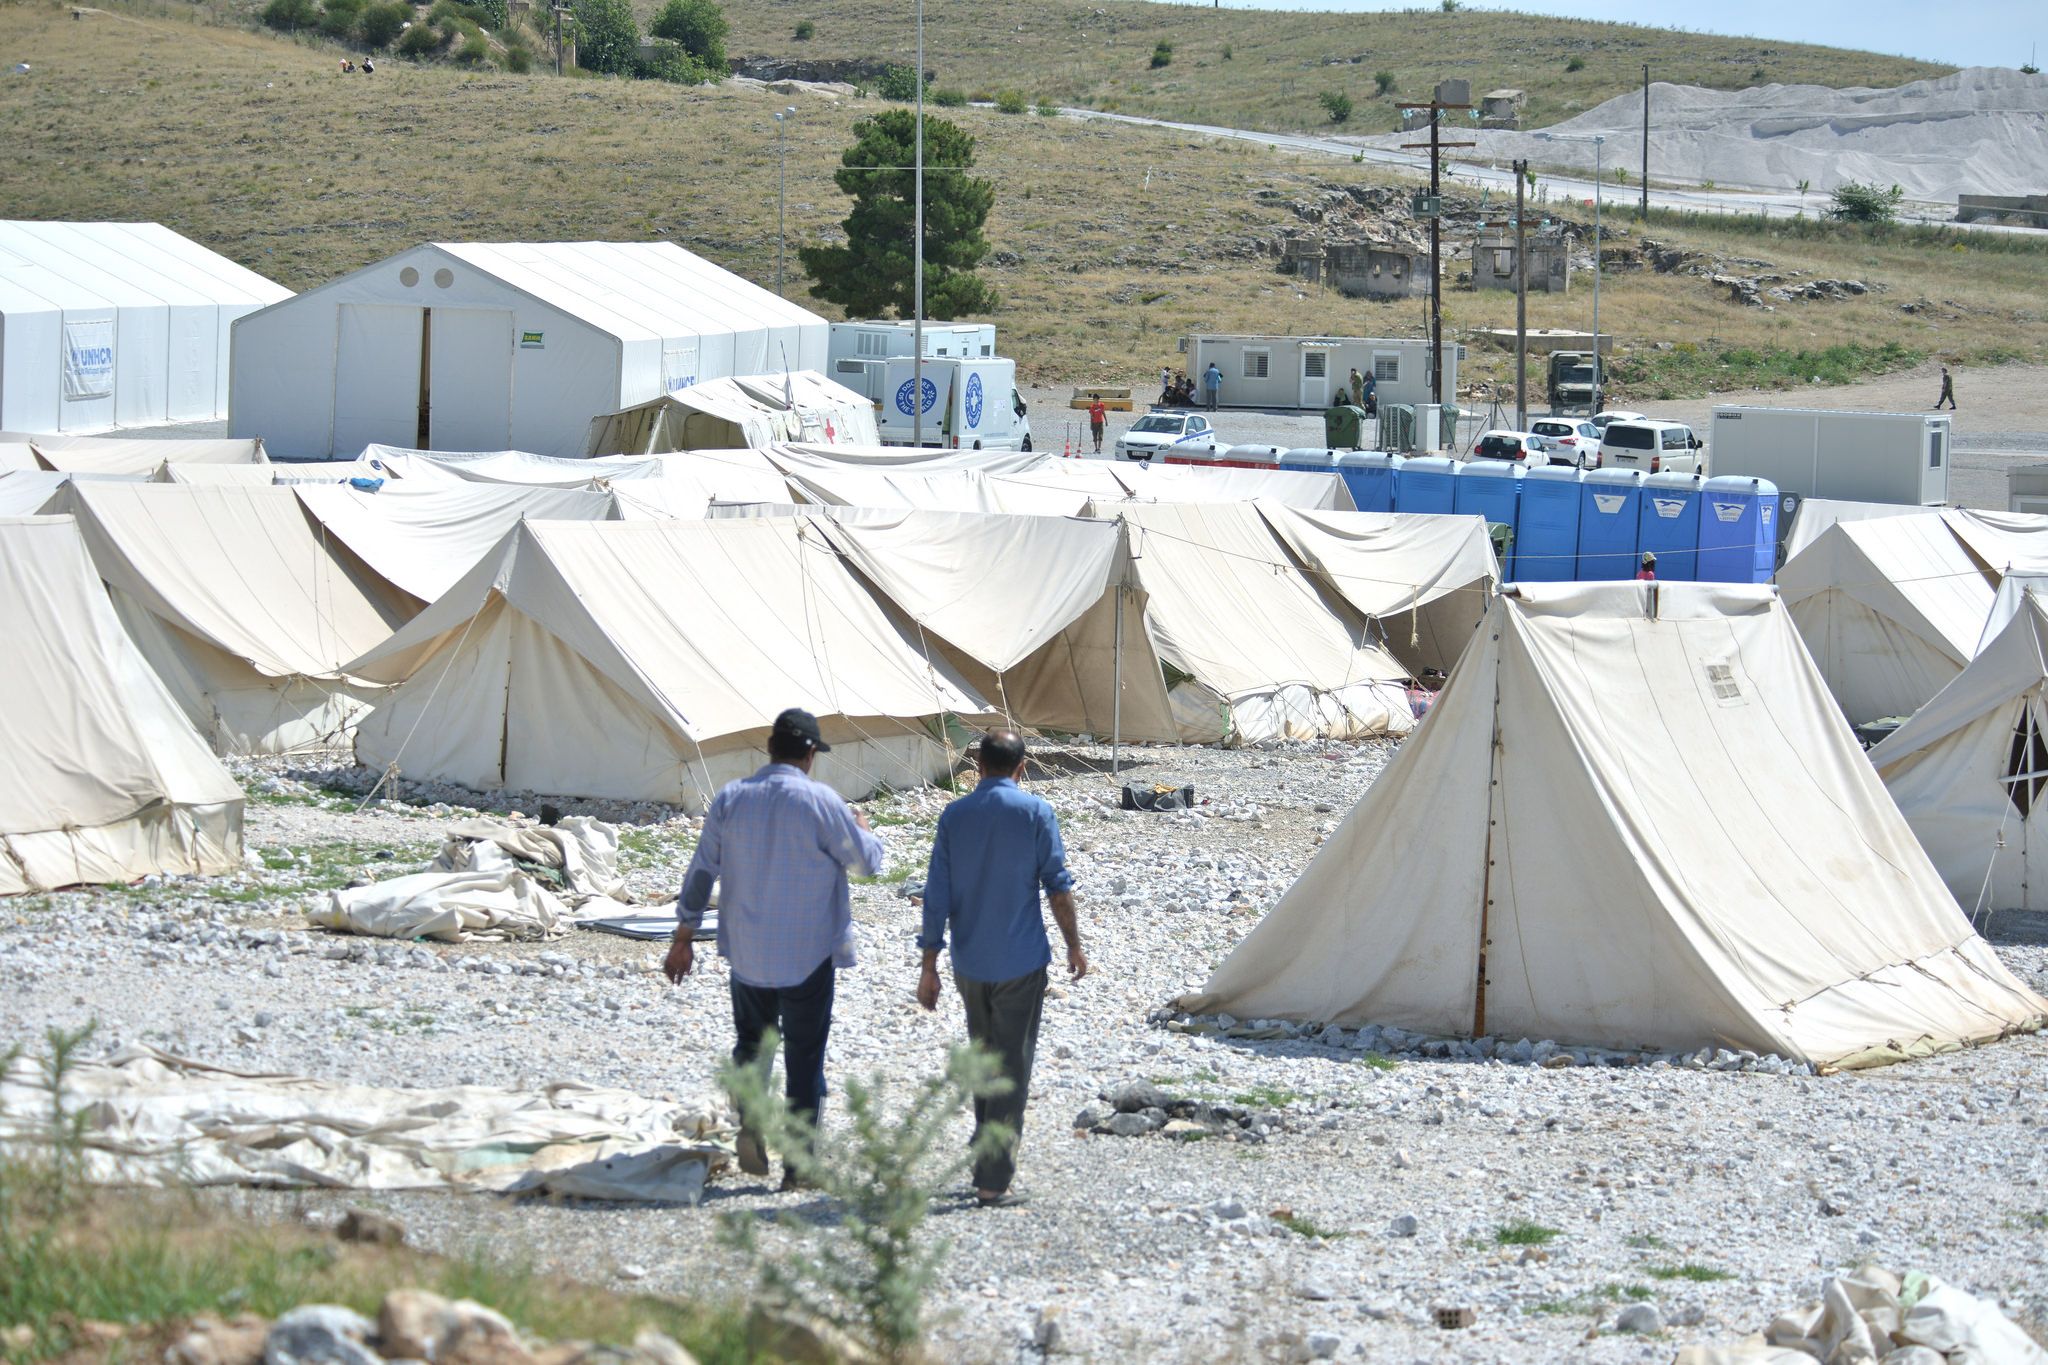 Many were evacuated to camps like this one, in Larisa, Greece. It’s located on a fenced gravel lot dotted with tents, off the side of a divided highway lined by fields the color of sand, over three-hours drive from Athens in one of the hottest, driest parts of the country. More than 800 Afghans and Syrians were deposited here, in the middle of nowhere, by government busses months ago, with no information on why or for how long. Image by Frederick Atax.